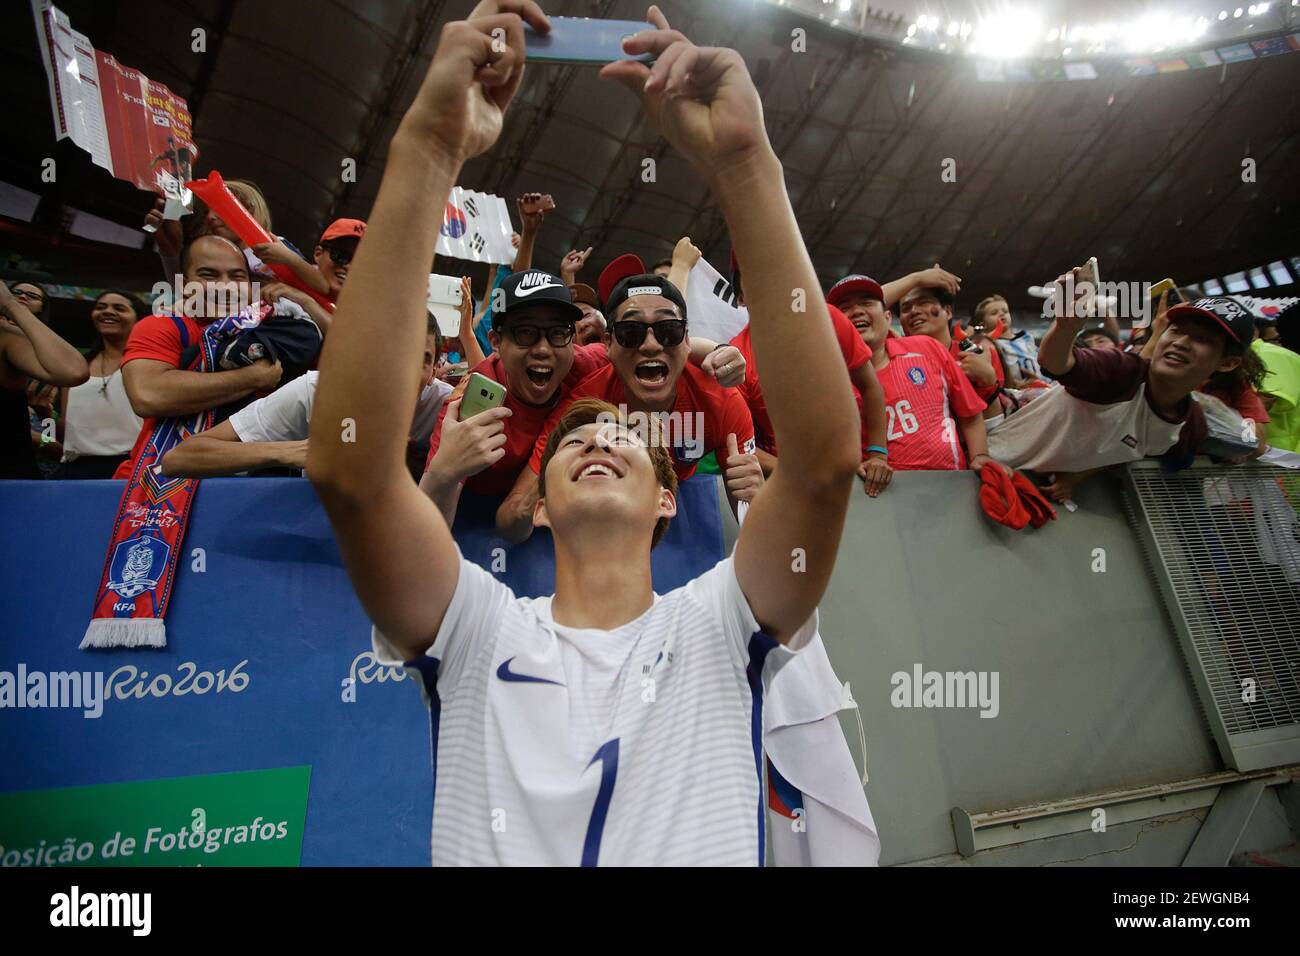 BRASÍLIA, DF - 10.08.2016: OLYMPICS 2016 FOOTBALL BRASILIA - Kin of Korea  celebrates with the crowd to win the match between Korea (KOR) and Mexico  (MEX) by Group C Olympic Men's FootbOll